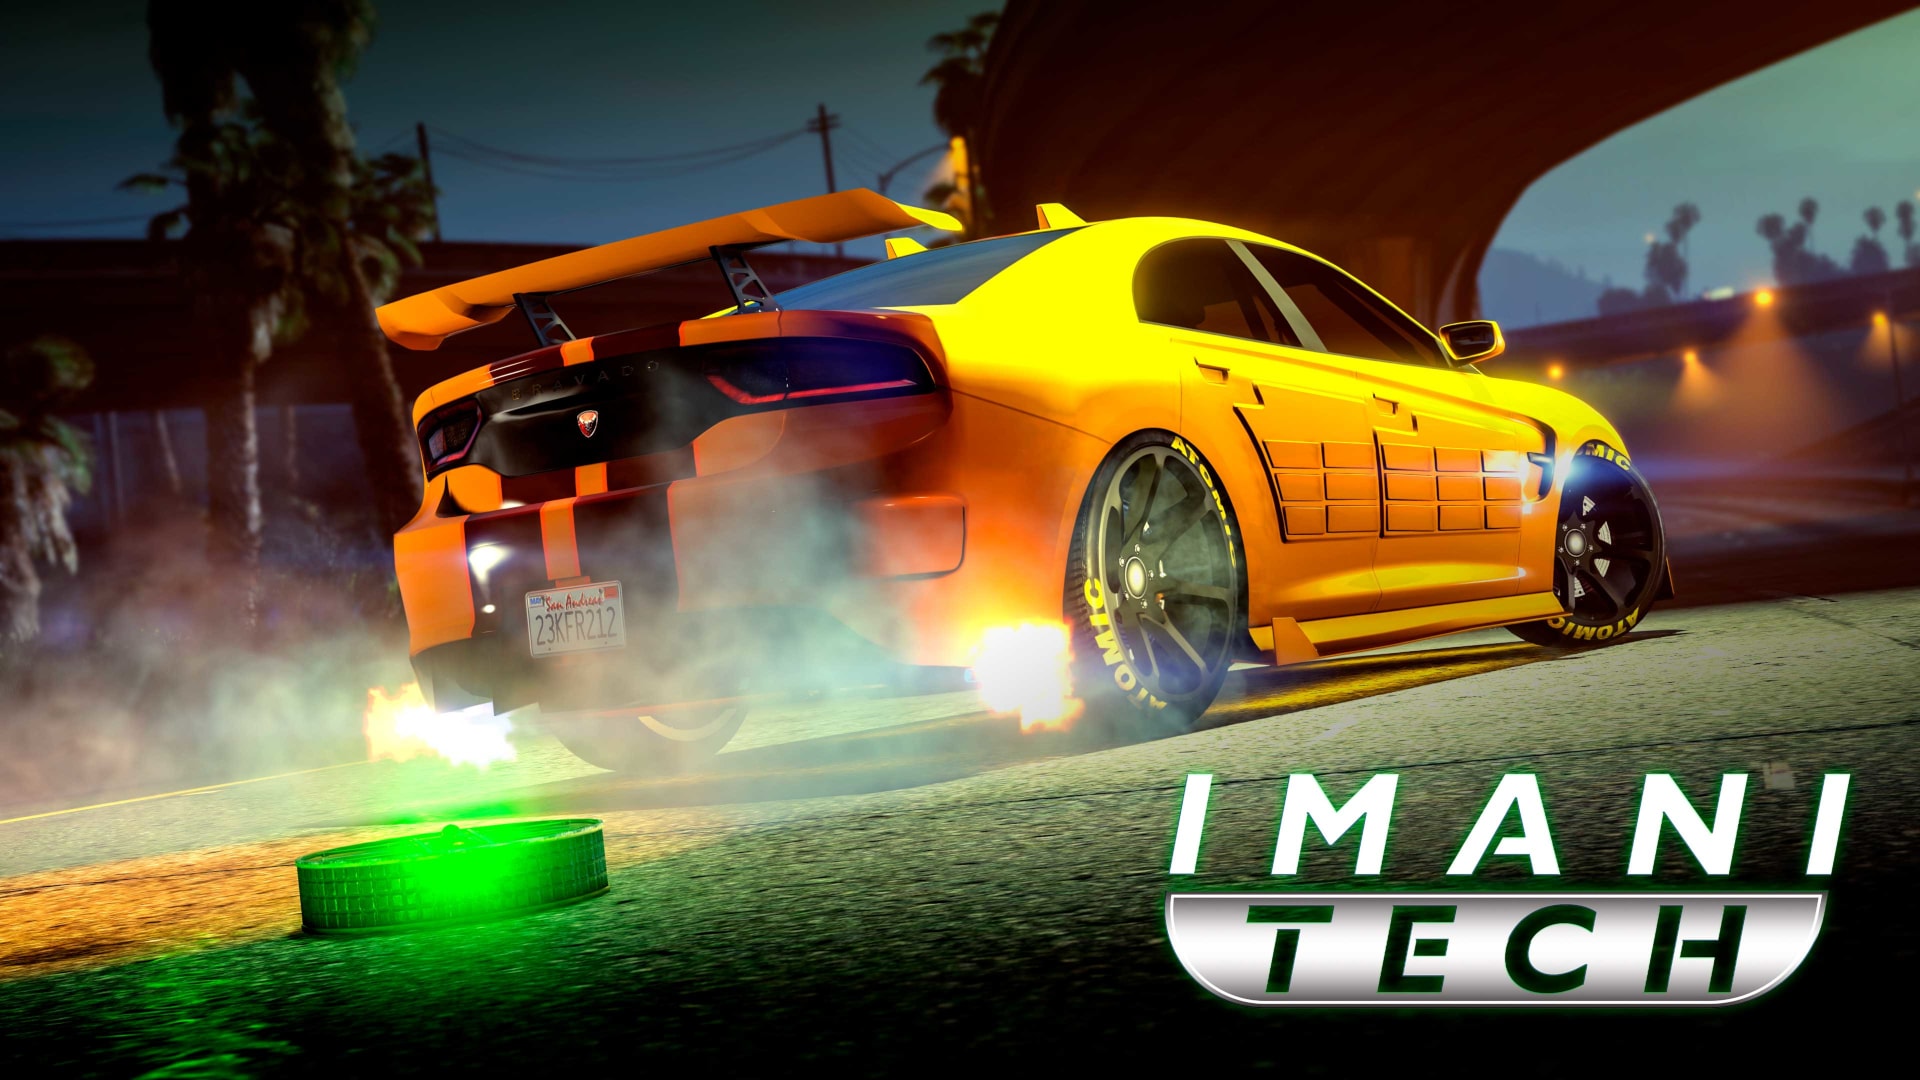 Gta Online Now Allows Players To Upgrade Their Vehicles With Imani Tech